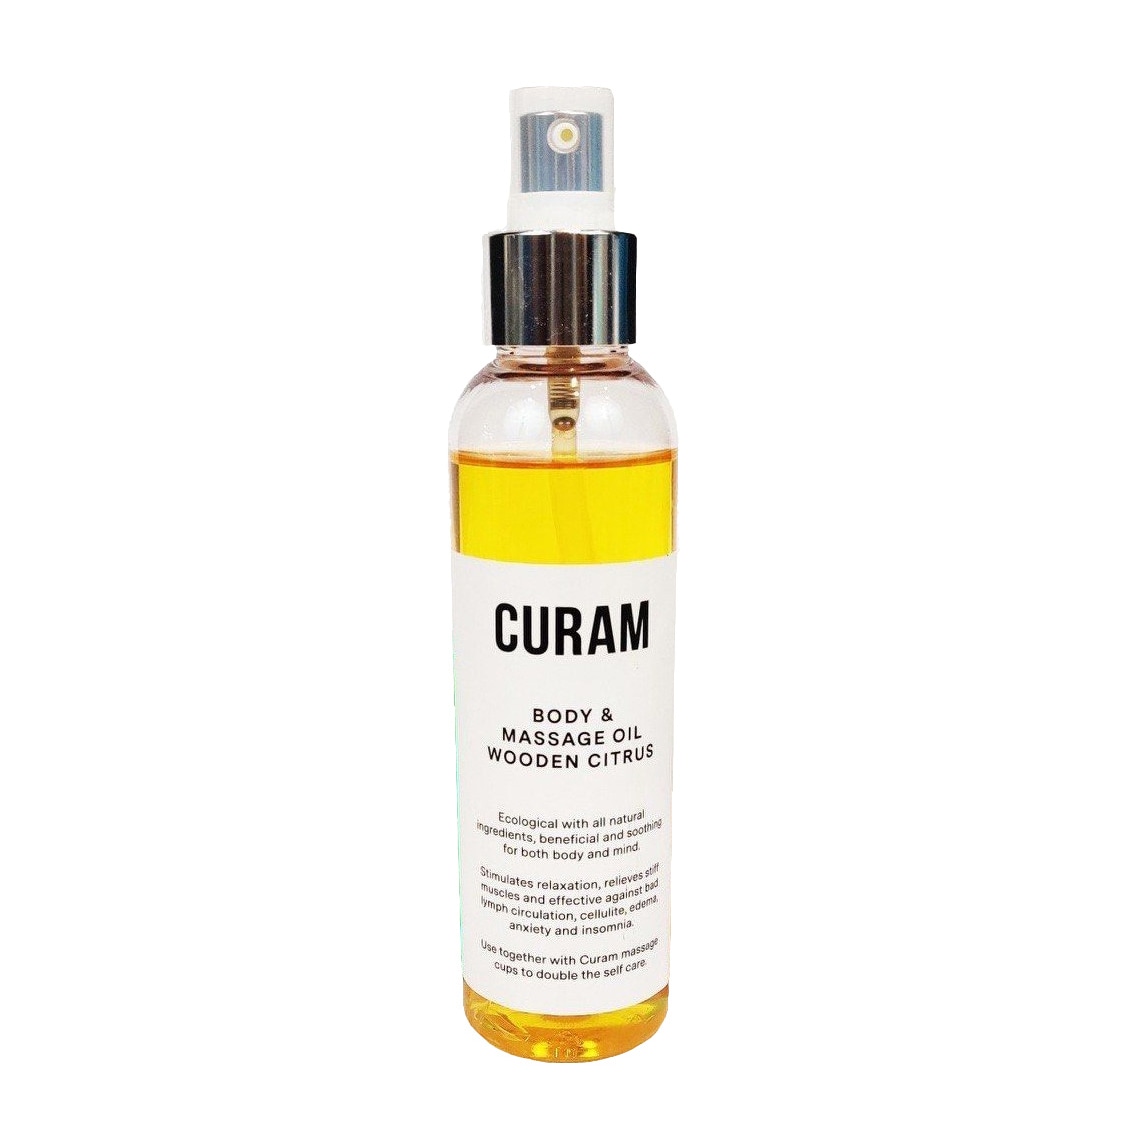 Body and massage oil Wooden Citrus